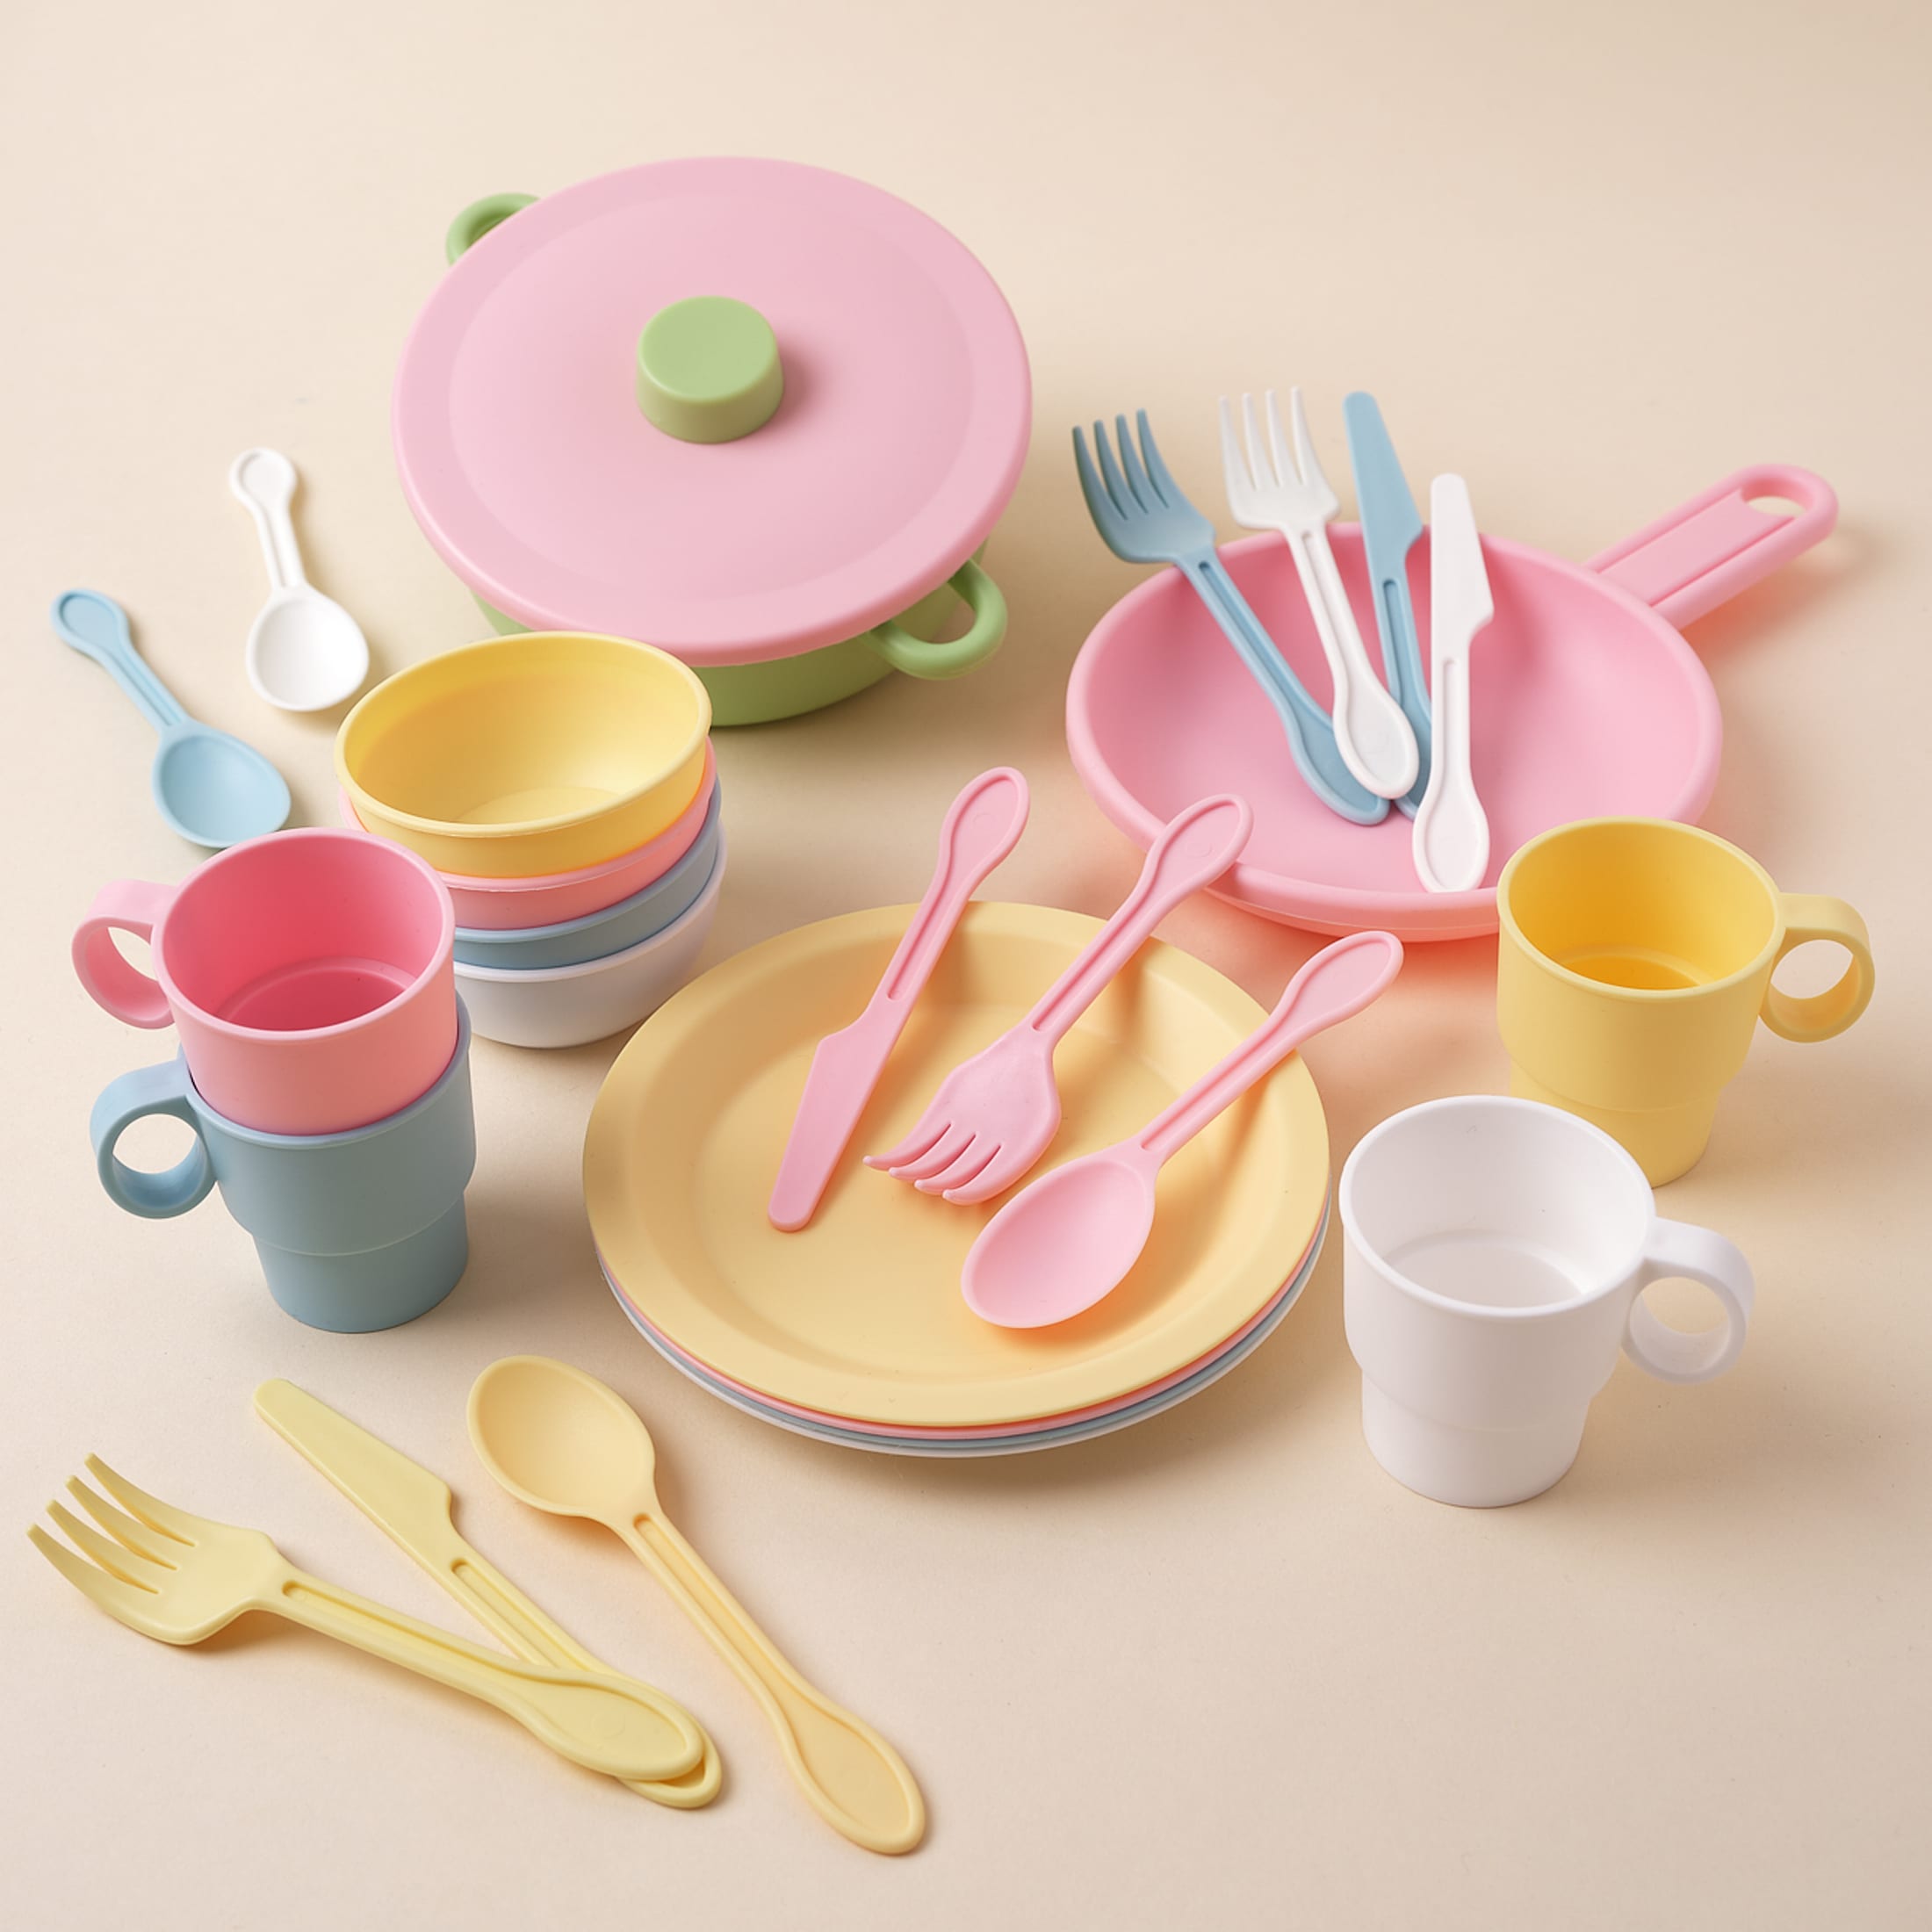 KidKraft 27-Piece Pastel Cookware Set, Plastic Dishes and Utensils for Play Kitchens - image 3 of 5